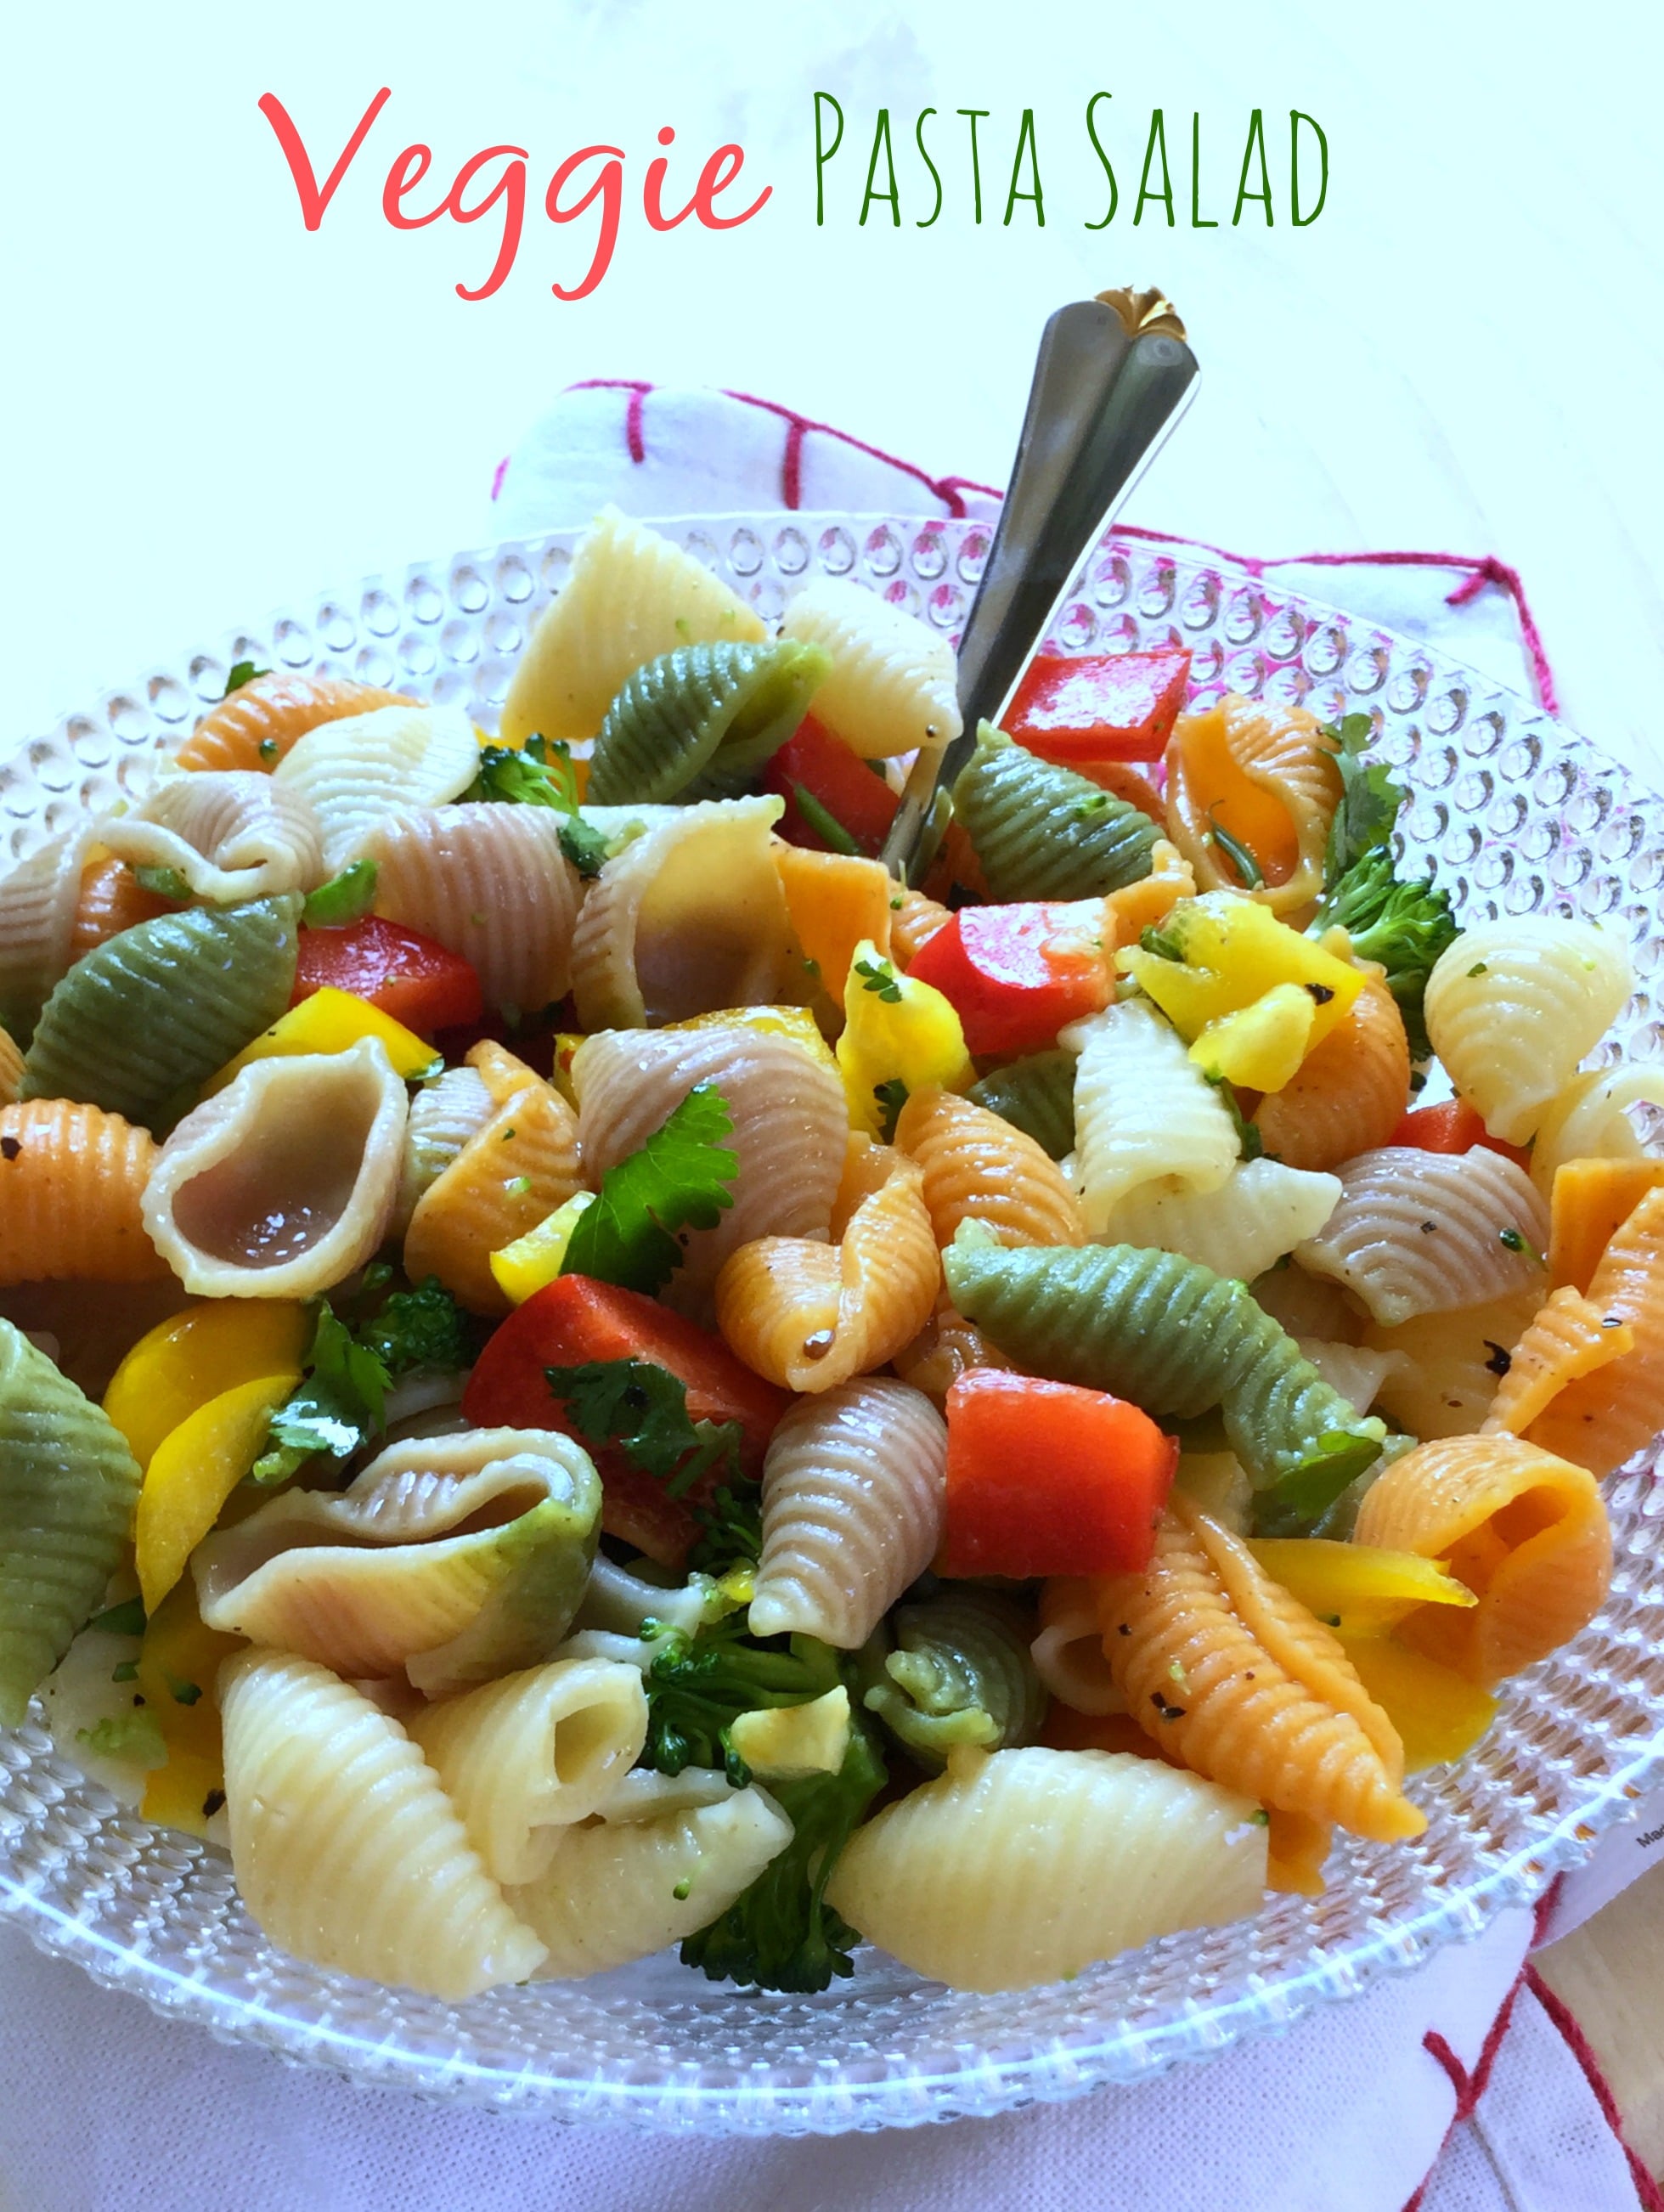 This Veggie Pasta Salad is filled with the best aromatic flavors of early spring.